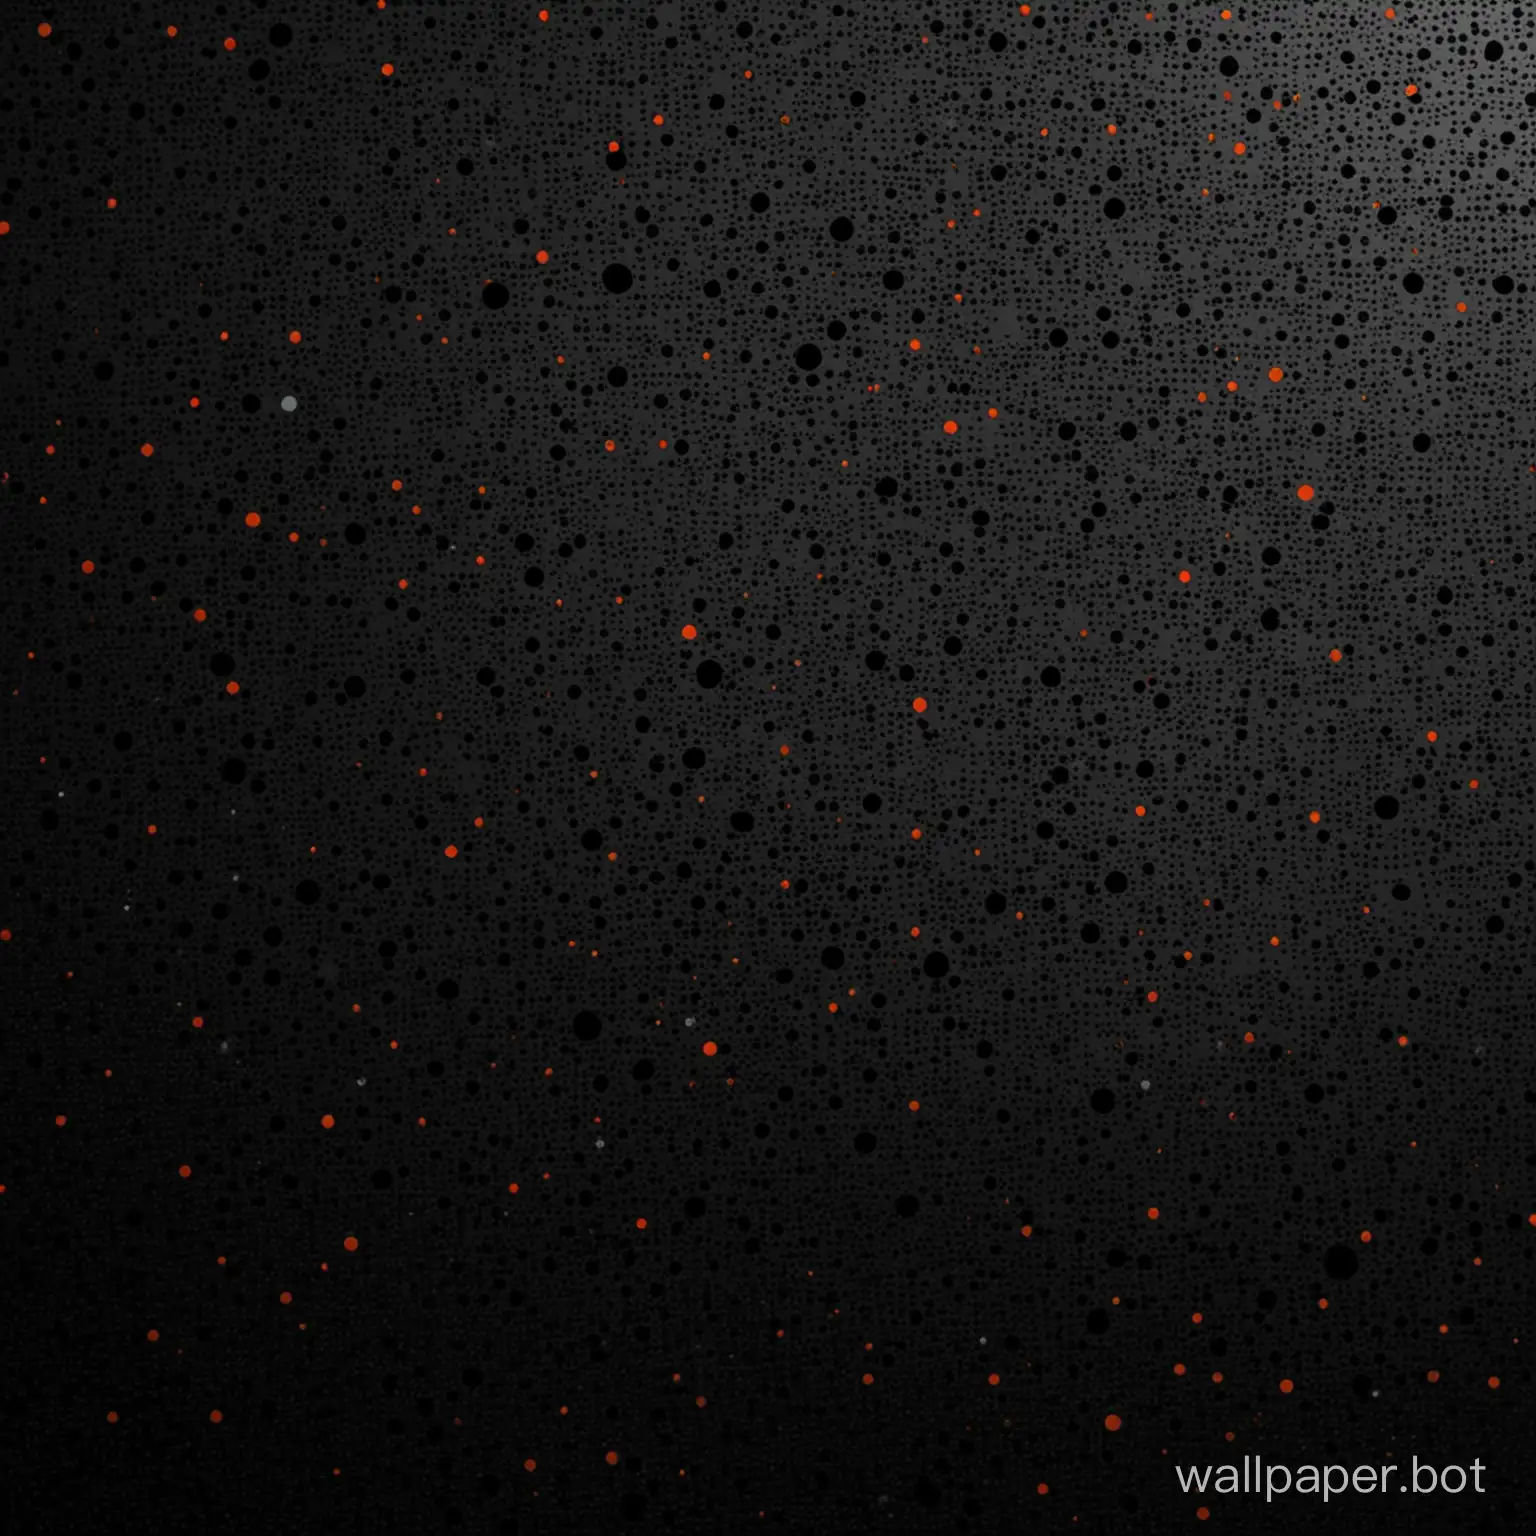 Abstract-Black-Background-with-Colorful-Spots-Wallpaper